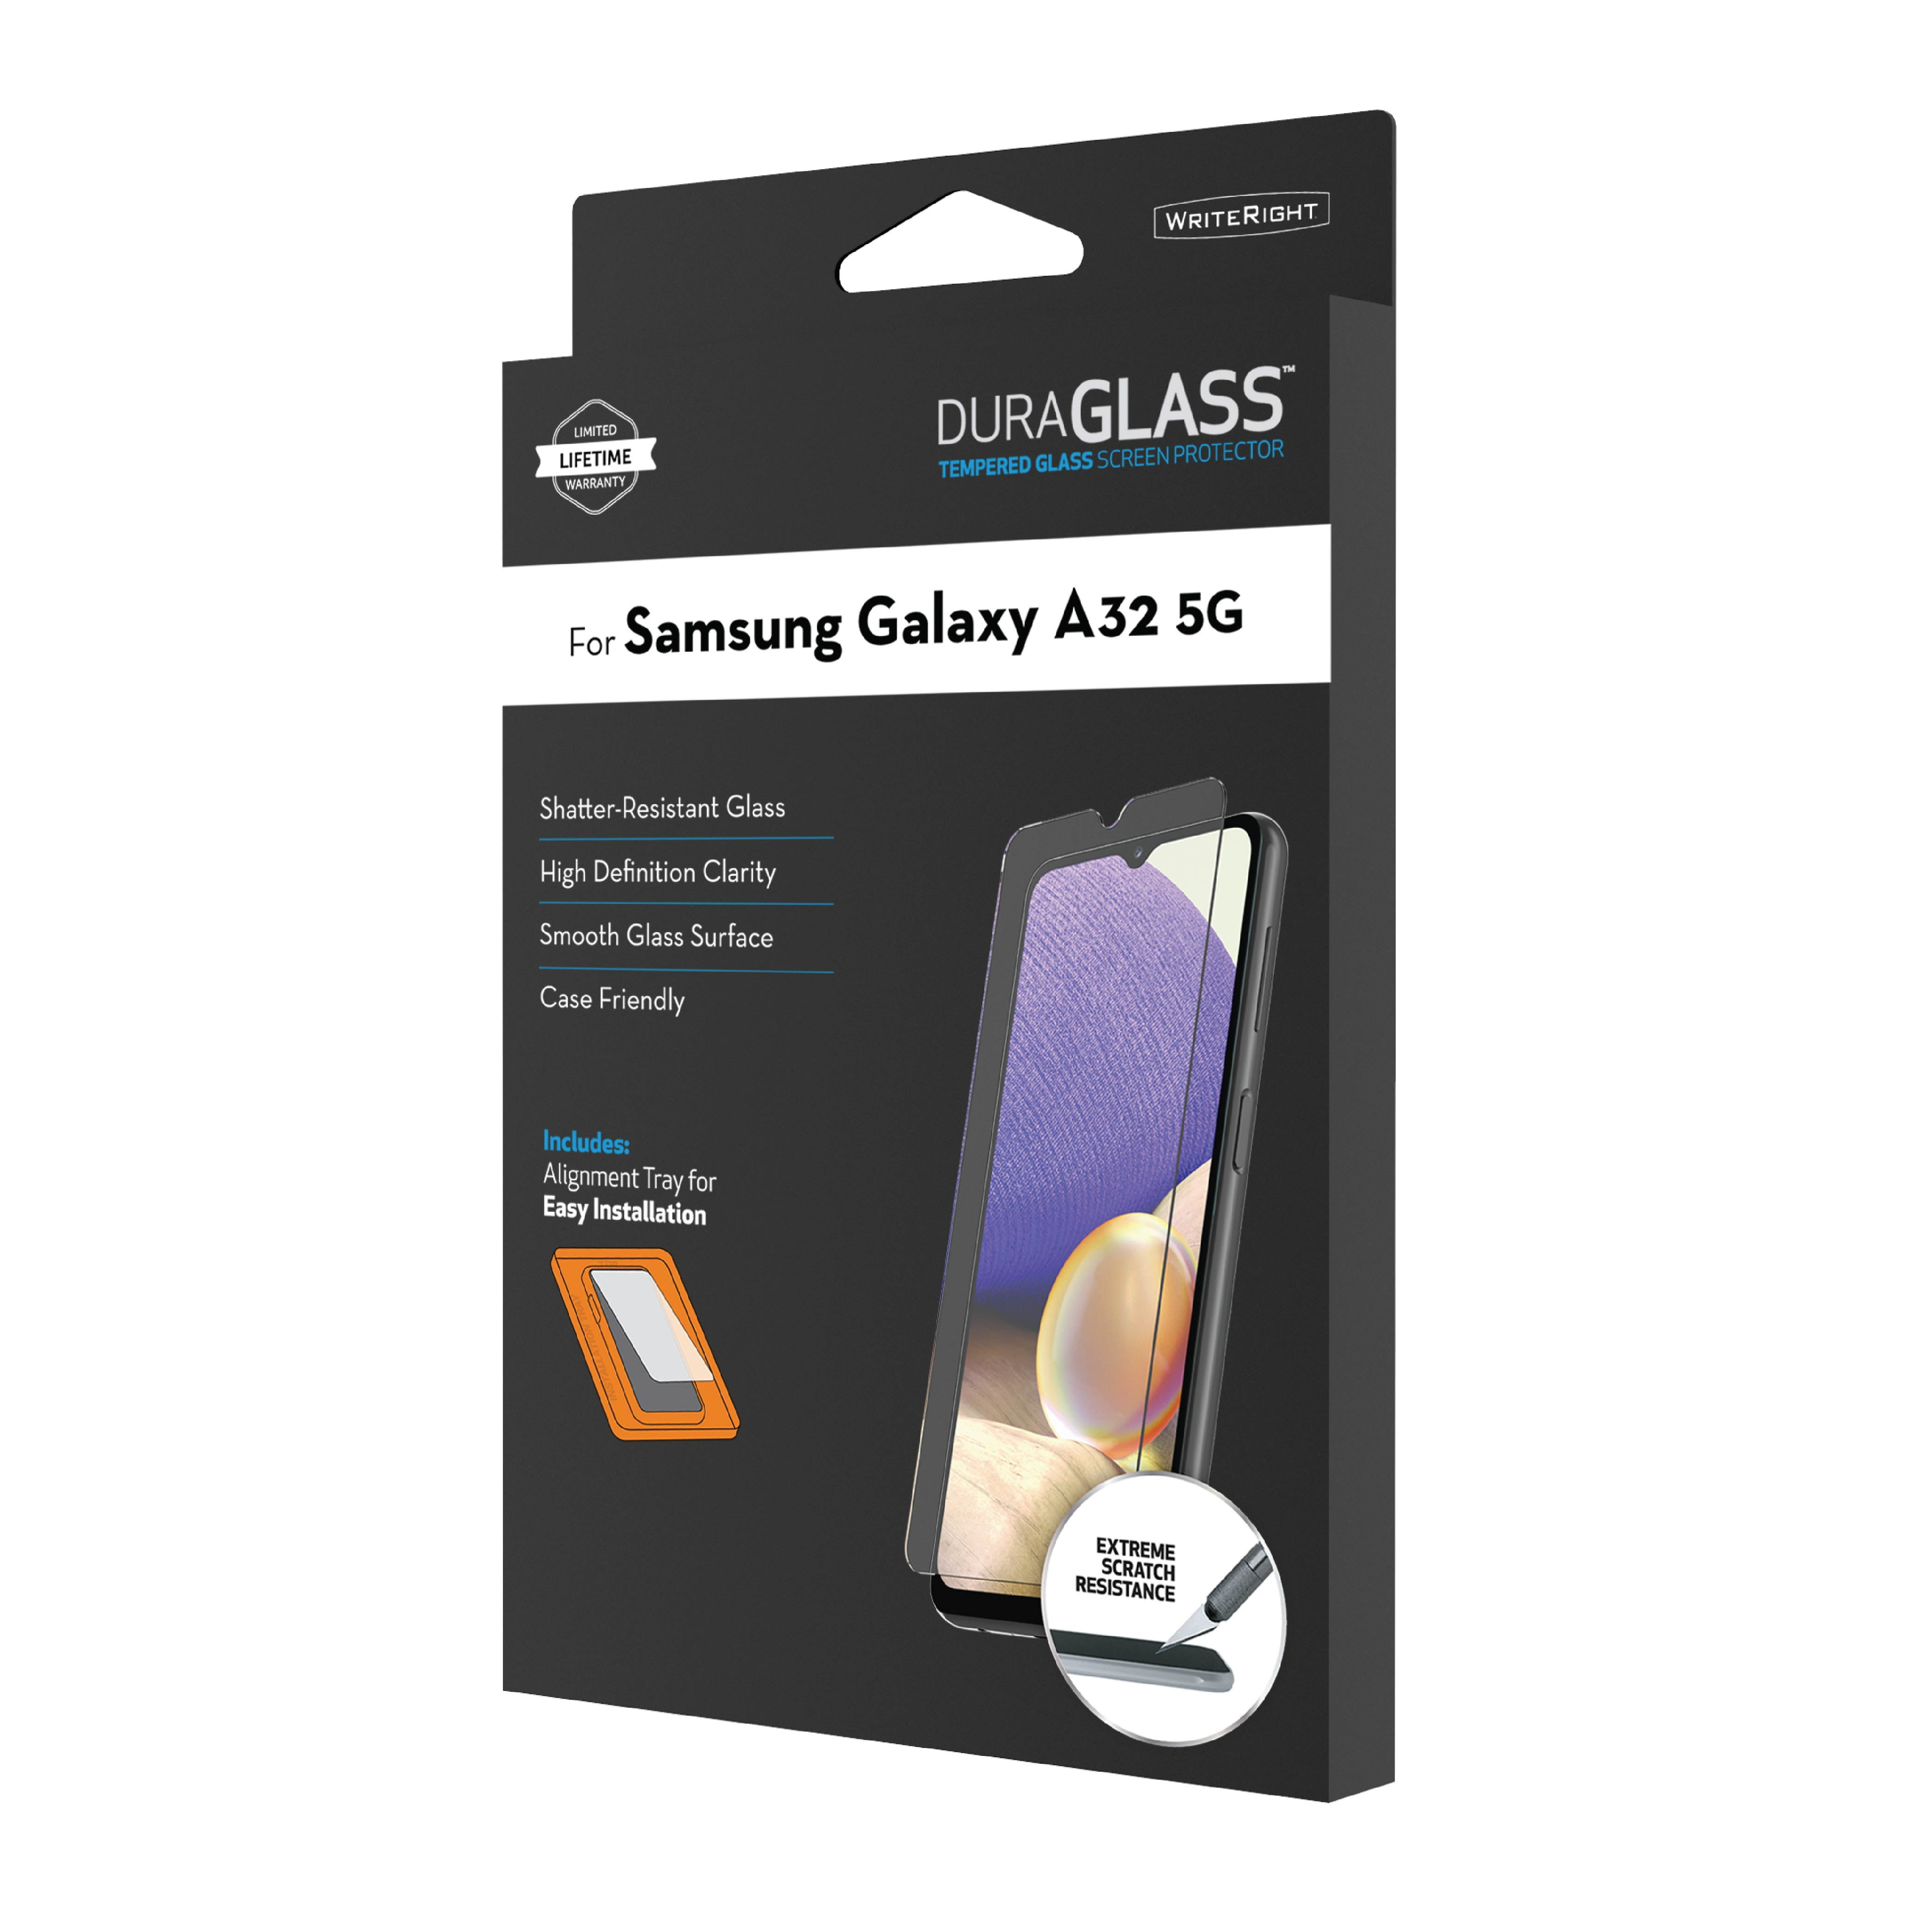 DuraGlass Tempered Glass Screen Protector for Samsung Galaxy A32 5G